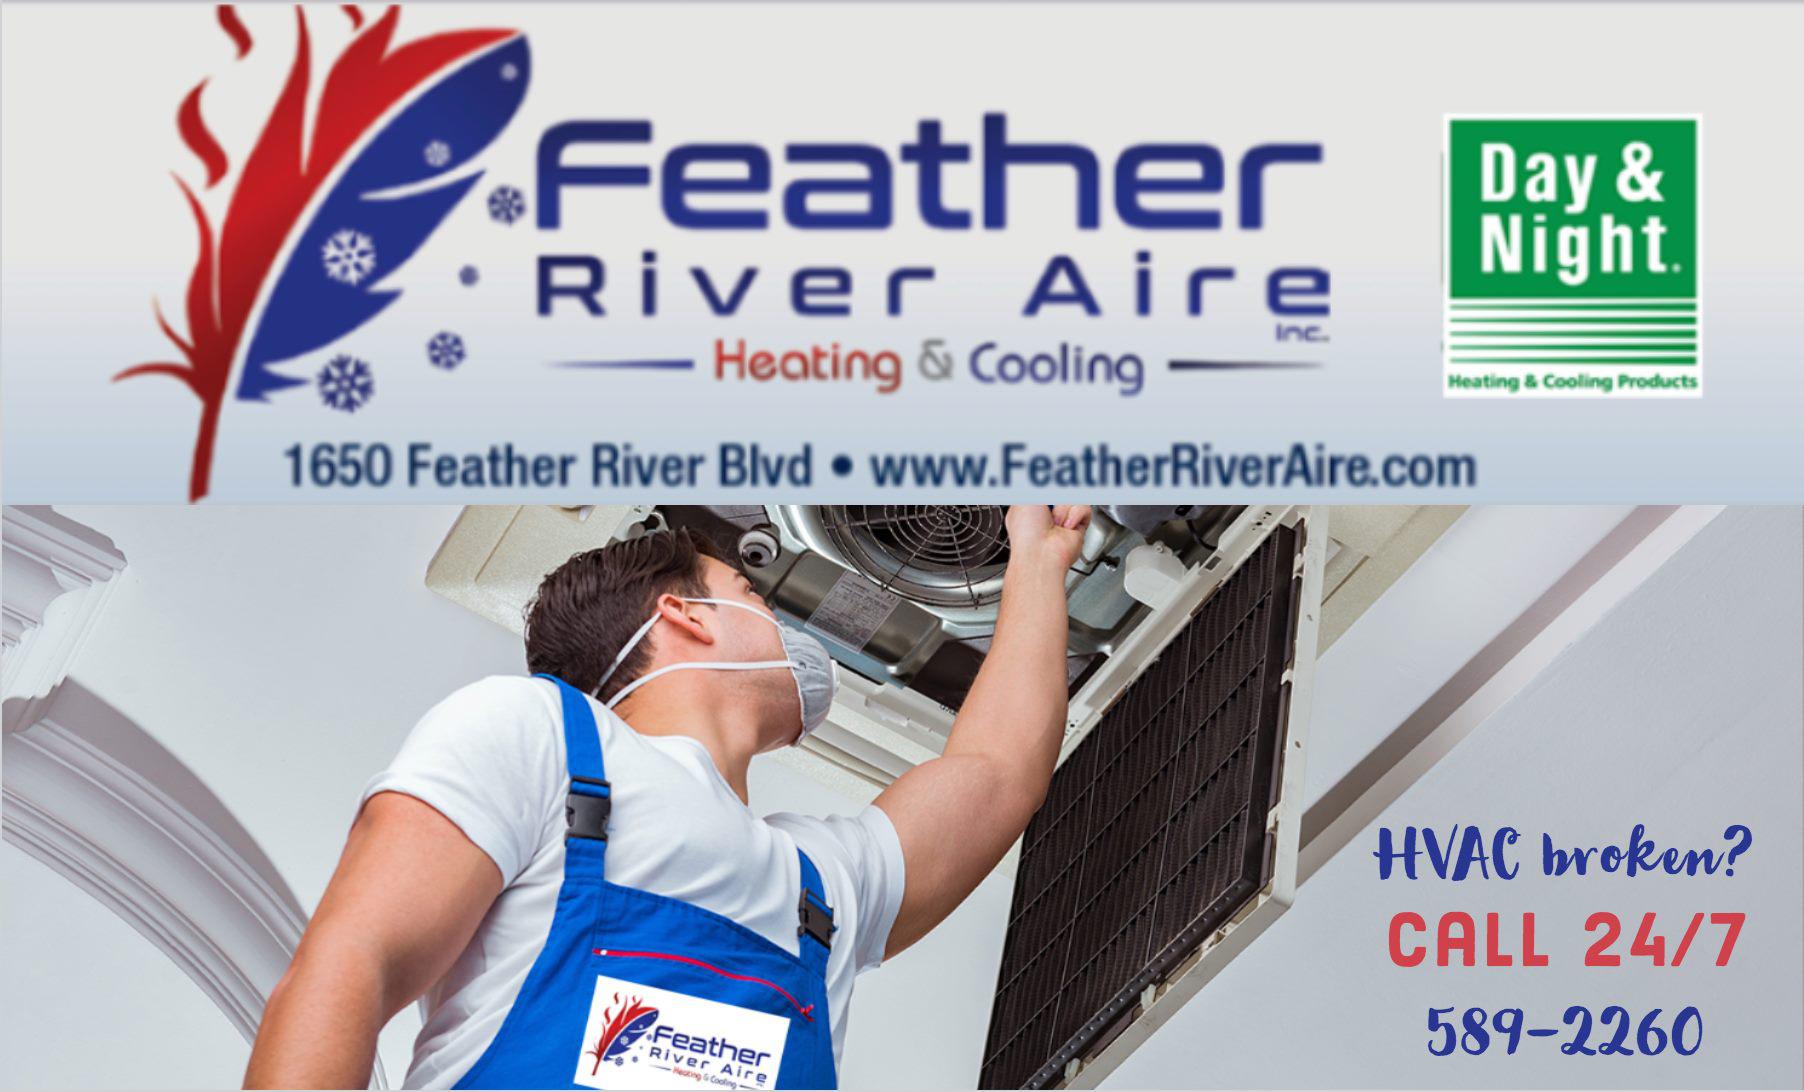 Feather River Aire Heating & Cooling Photo